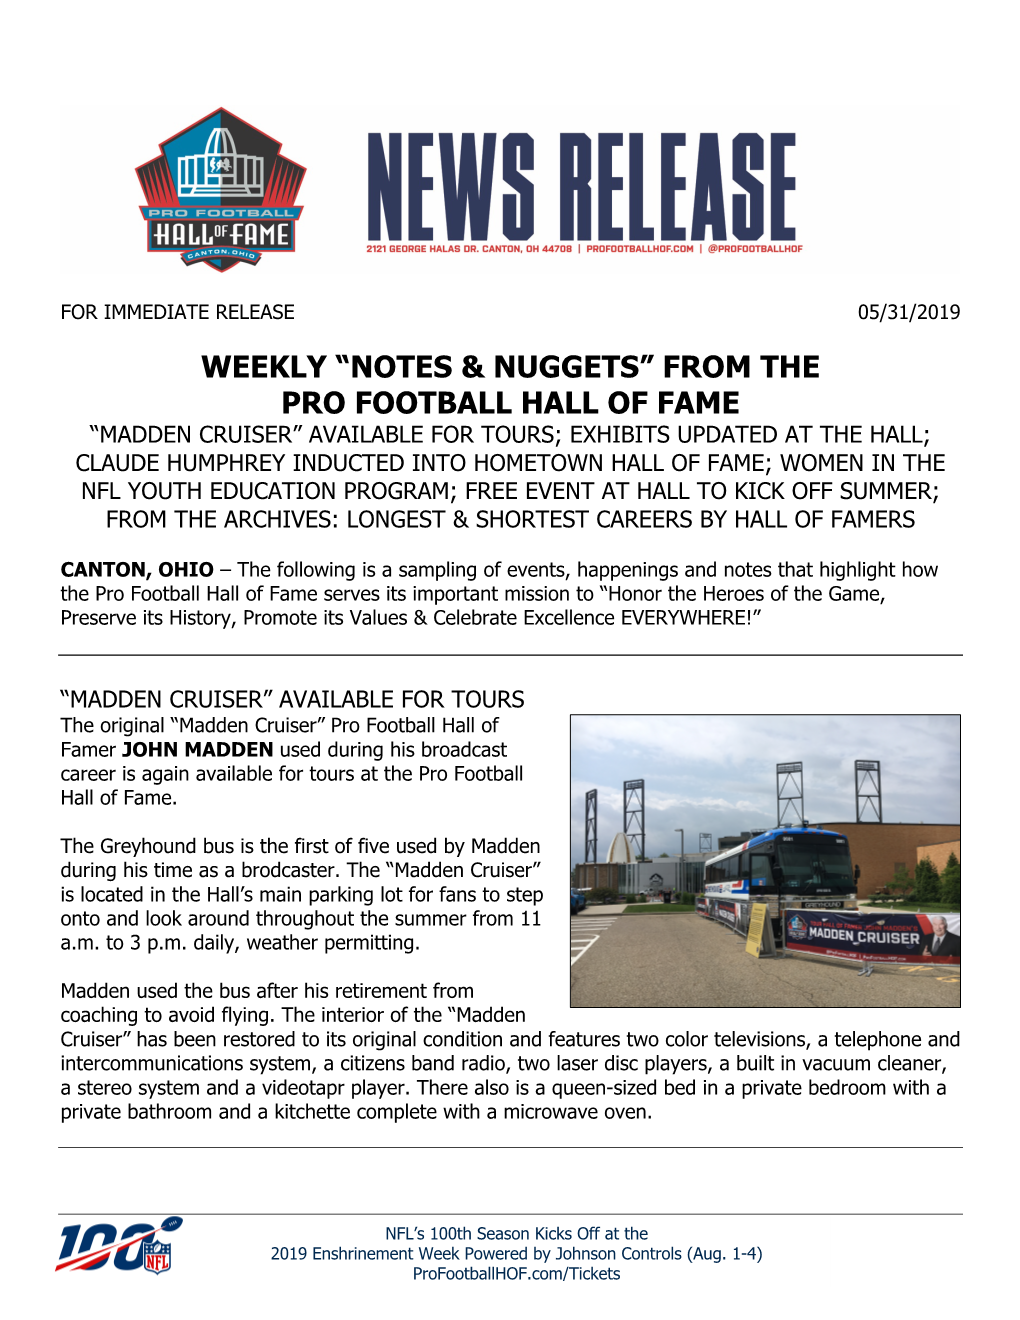 Weekly “Notes & Nuggets” from the Pro Football Hall of Fame